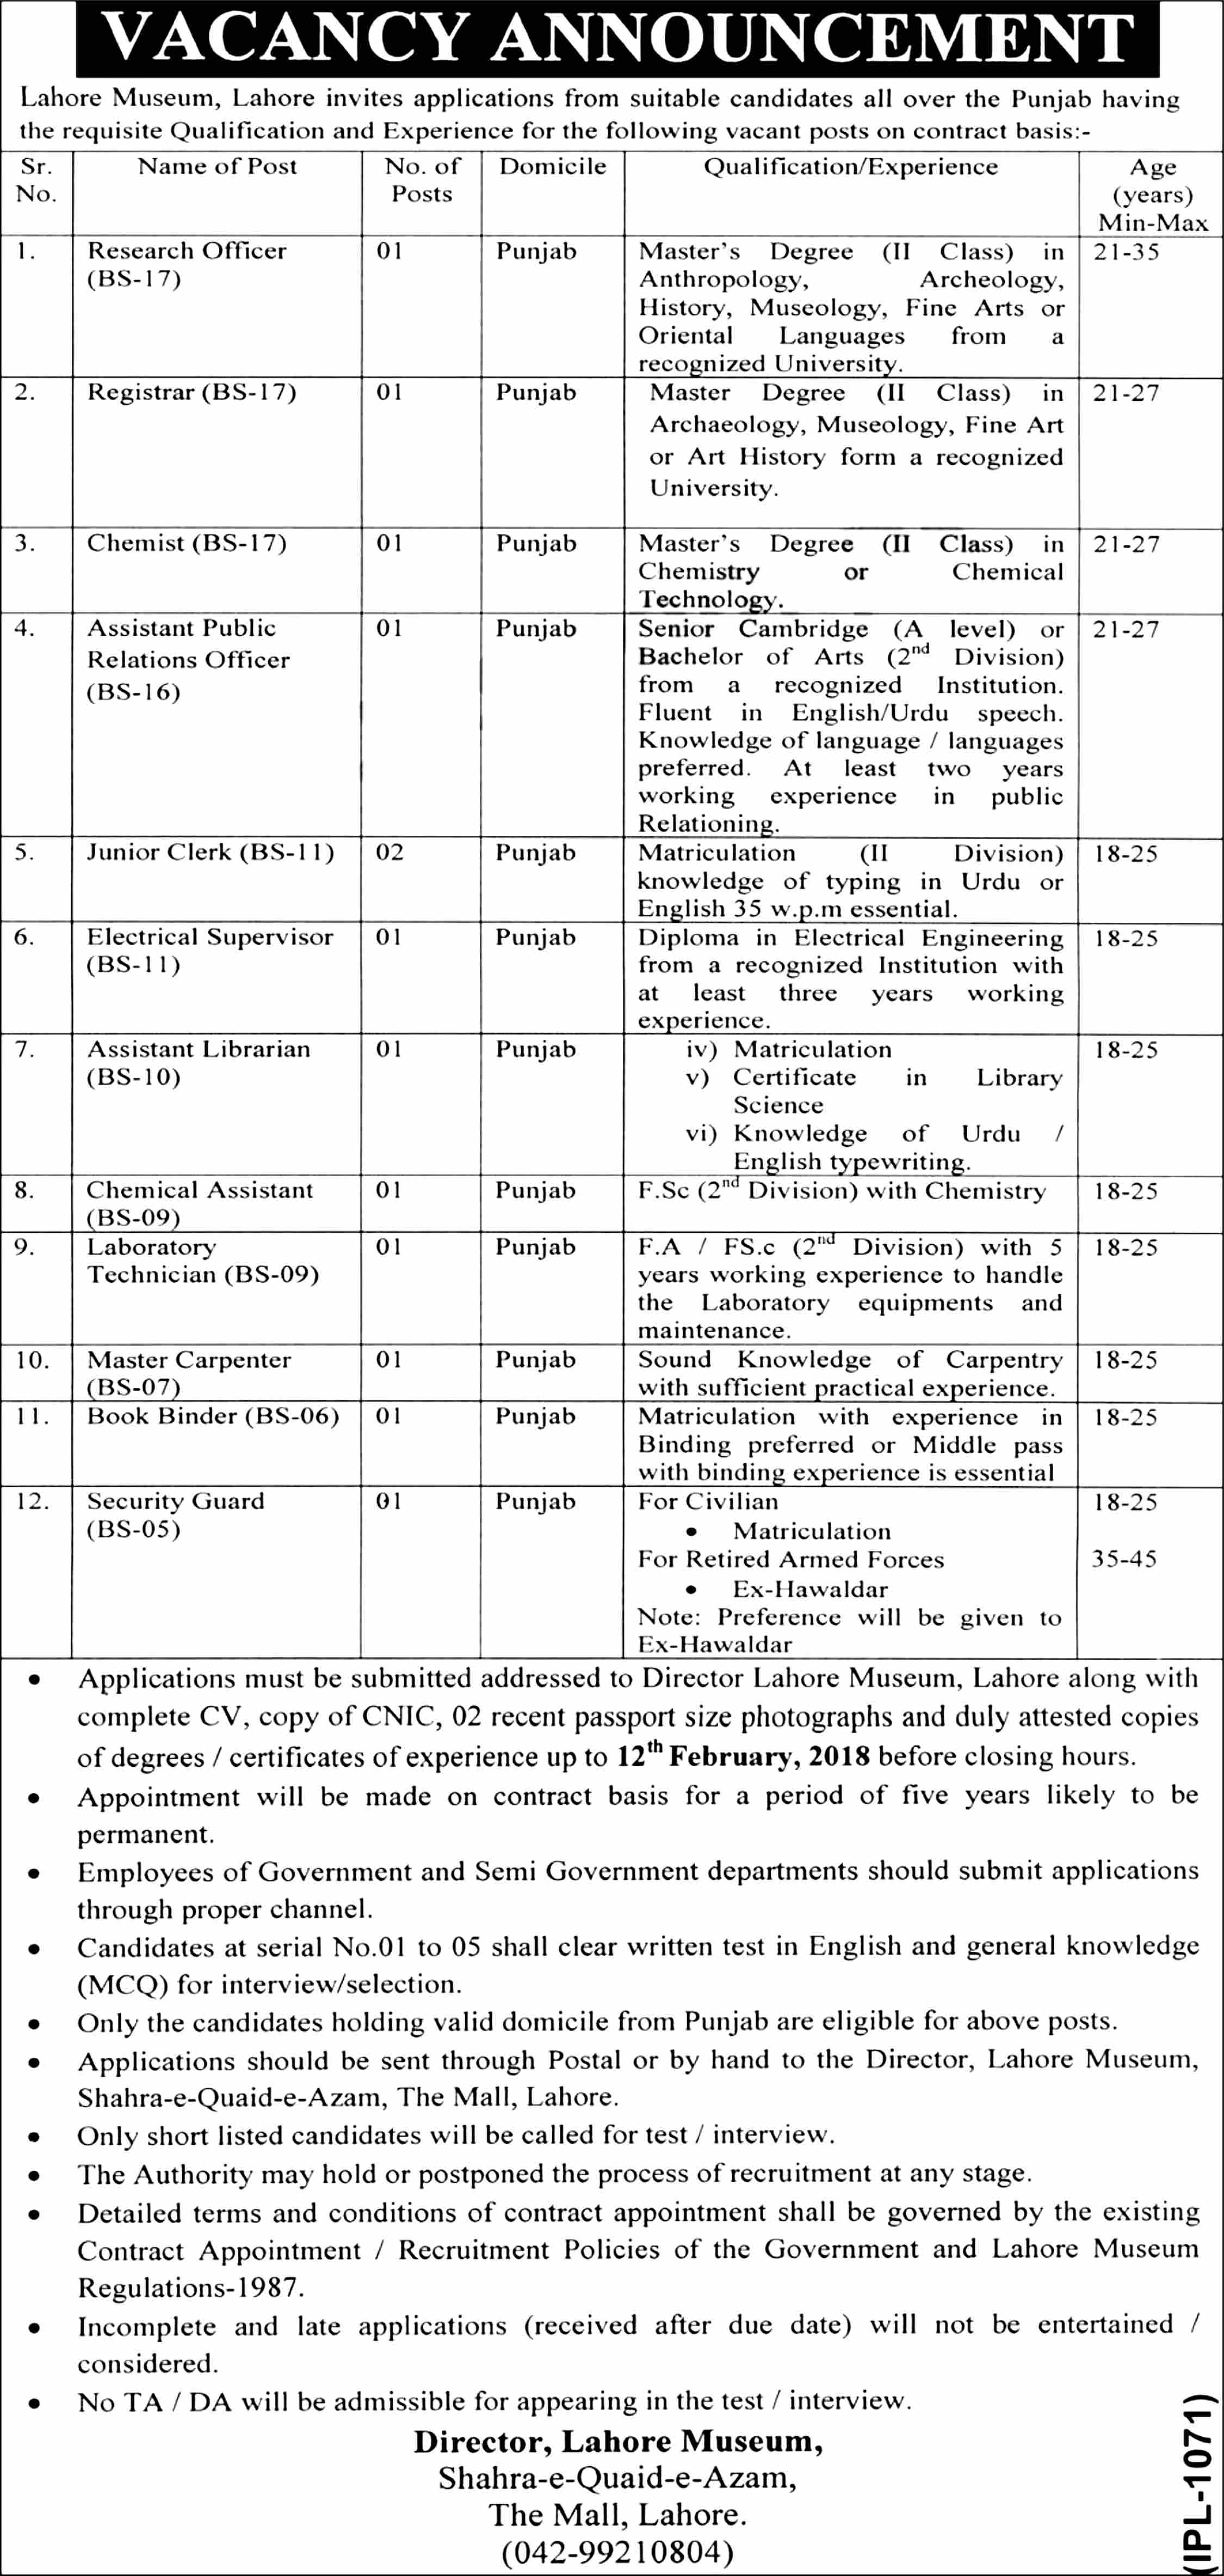 Govt. of the Punjab, Lahore Museum 13 Jobs, 24 January 2018, Daily Nation Newspaper